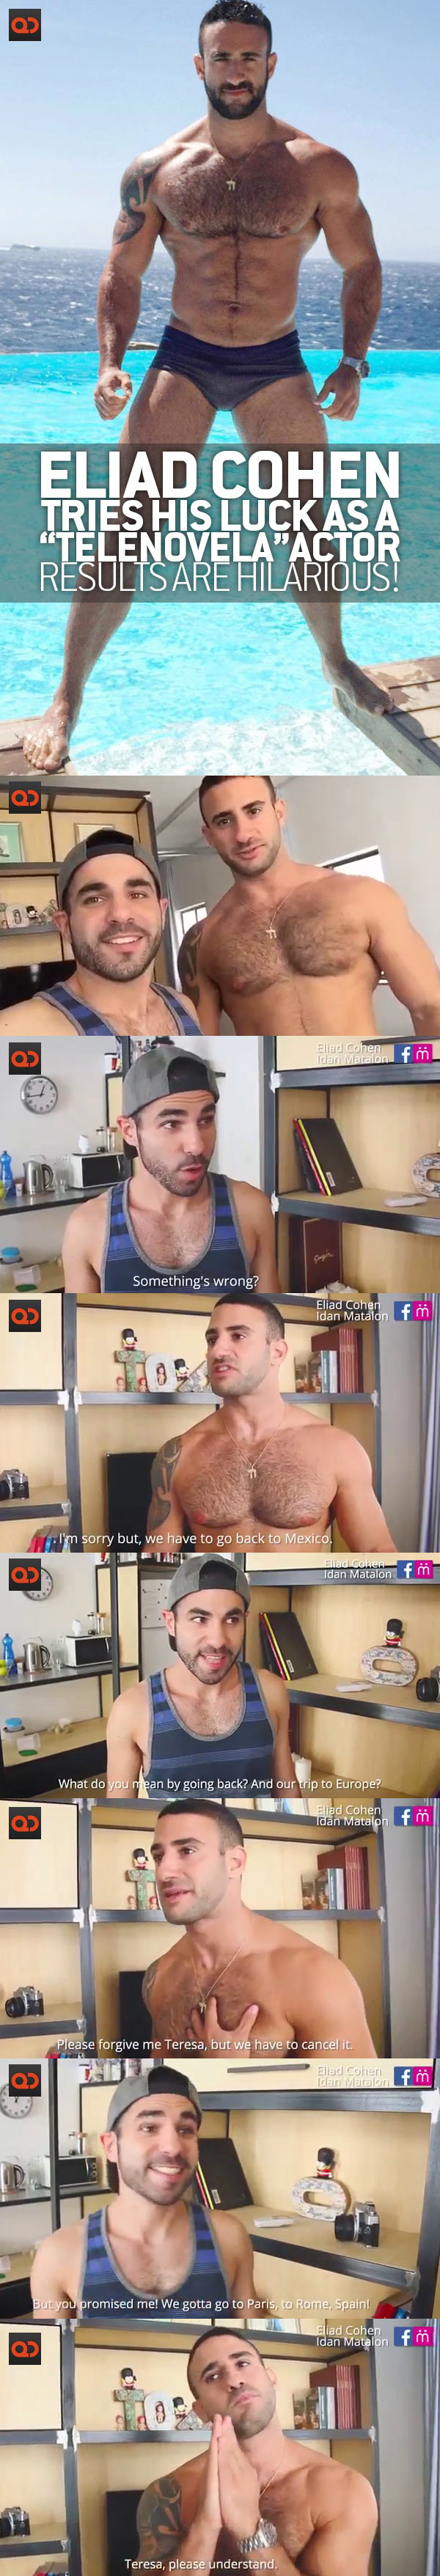 Eliad Cohen Tries His Luck As A “Telenovela” Actor, Results Are Hilarious!